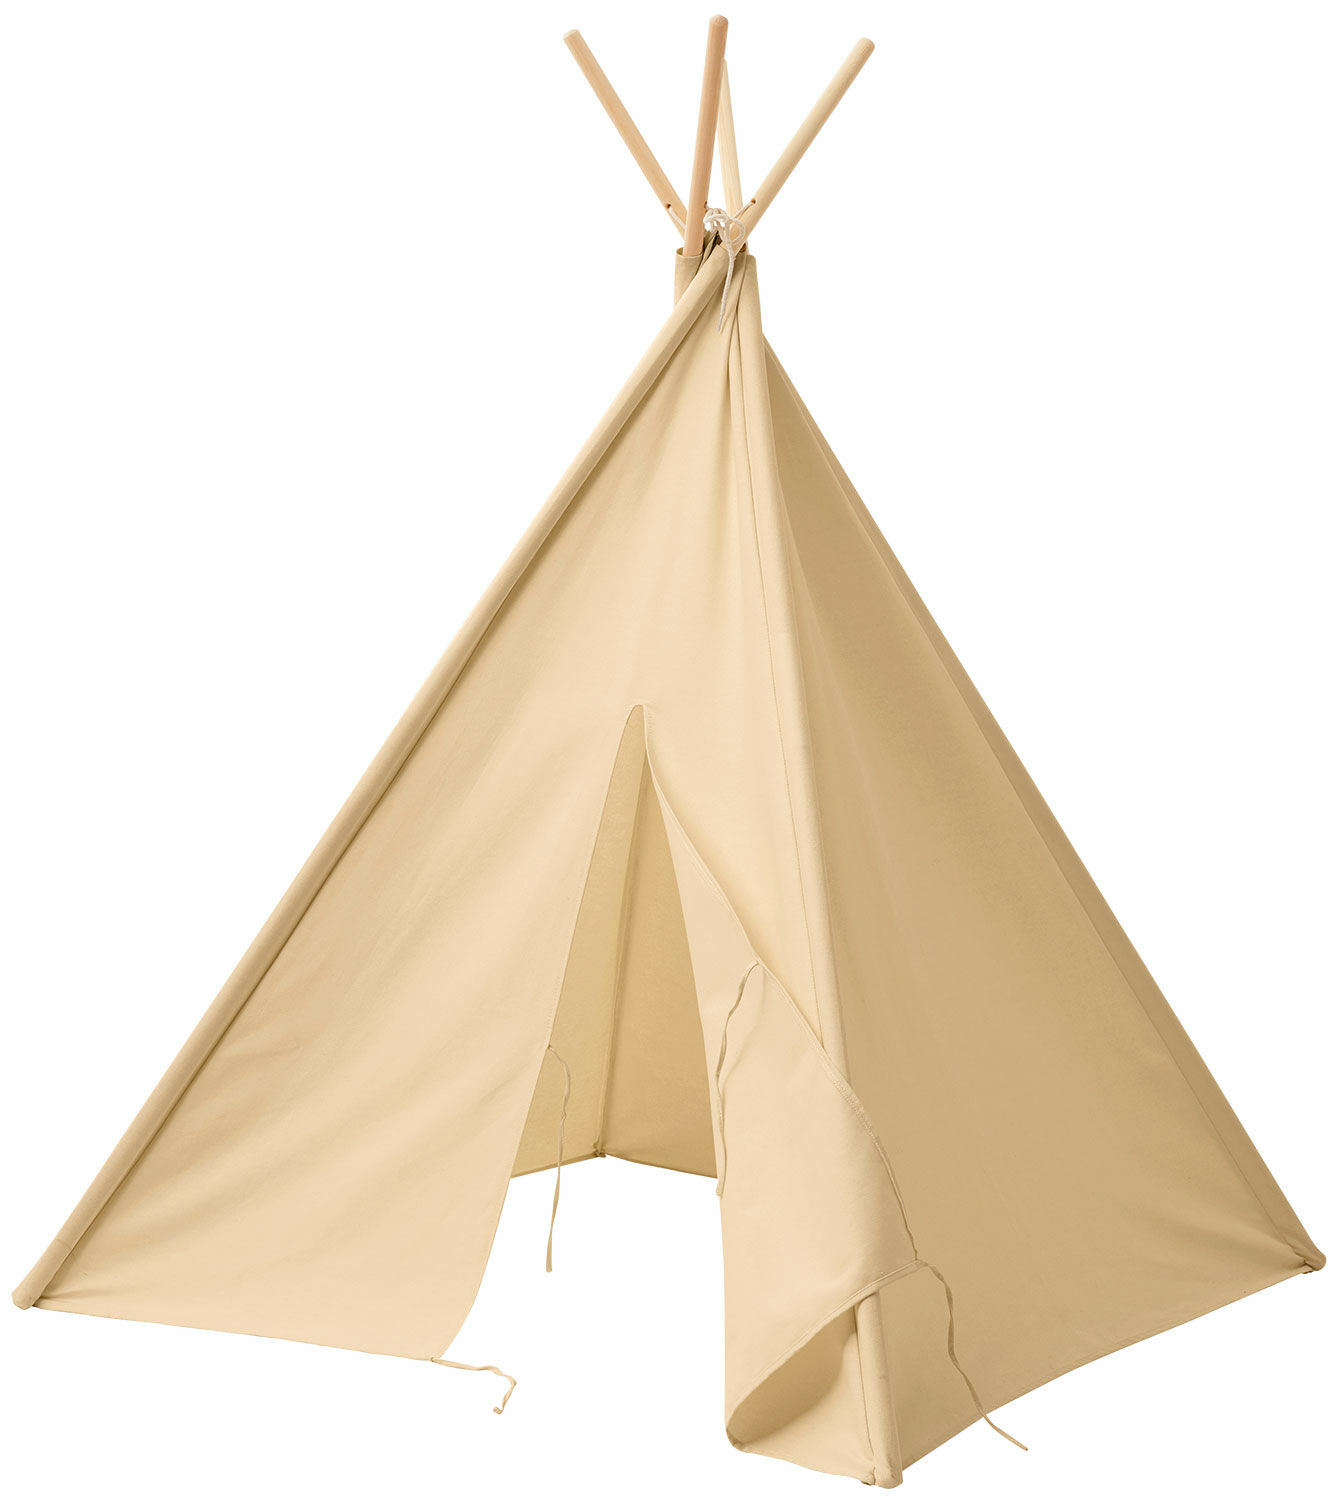 Children's tent "Tipi Yellow" (for children from 3 years) by Kid's Concept